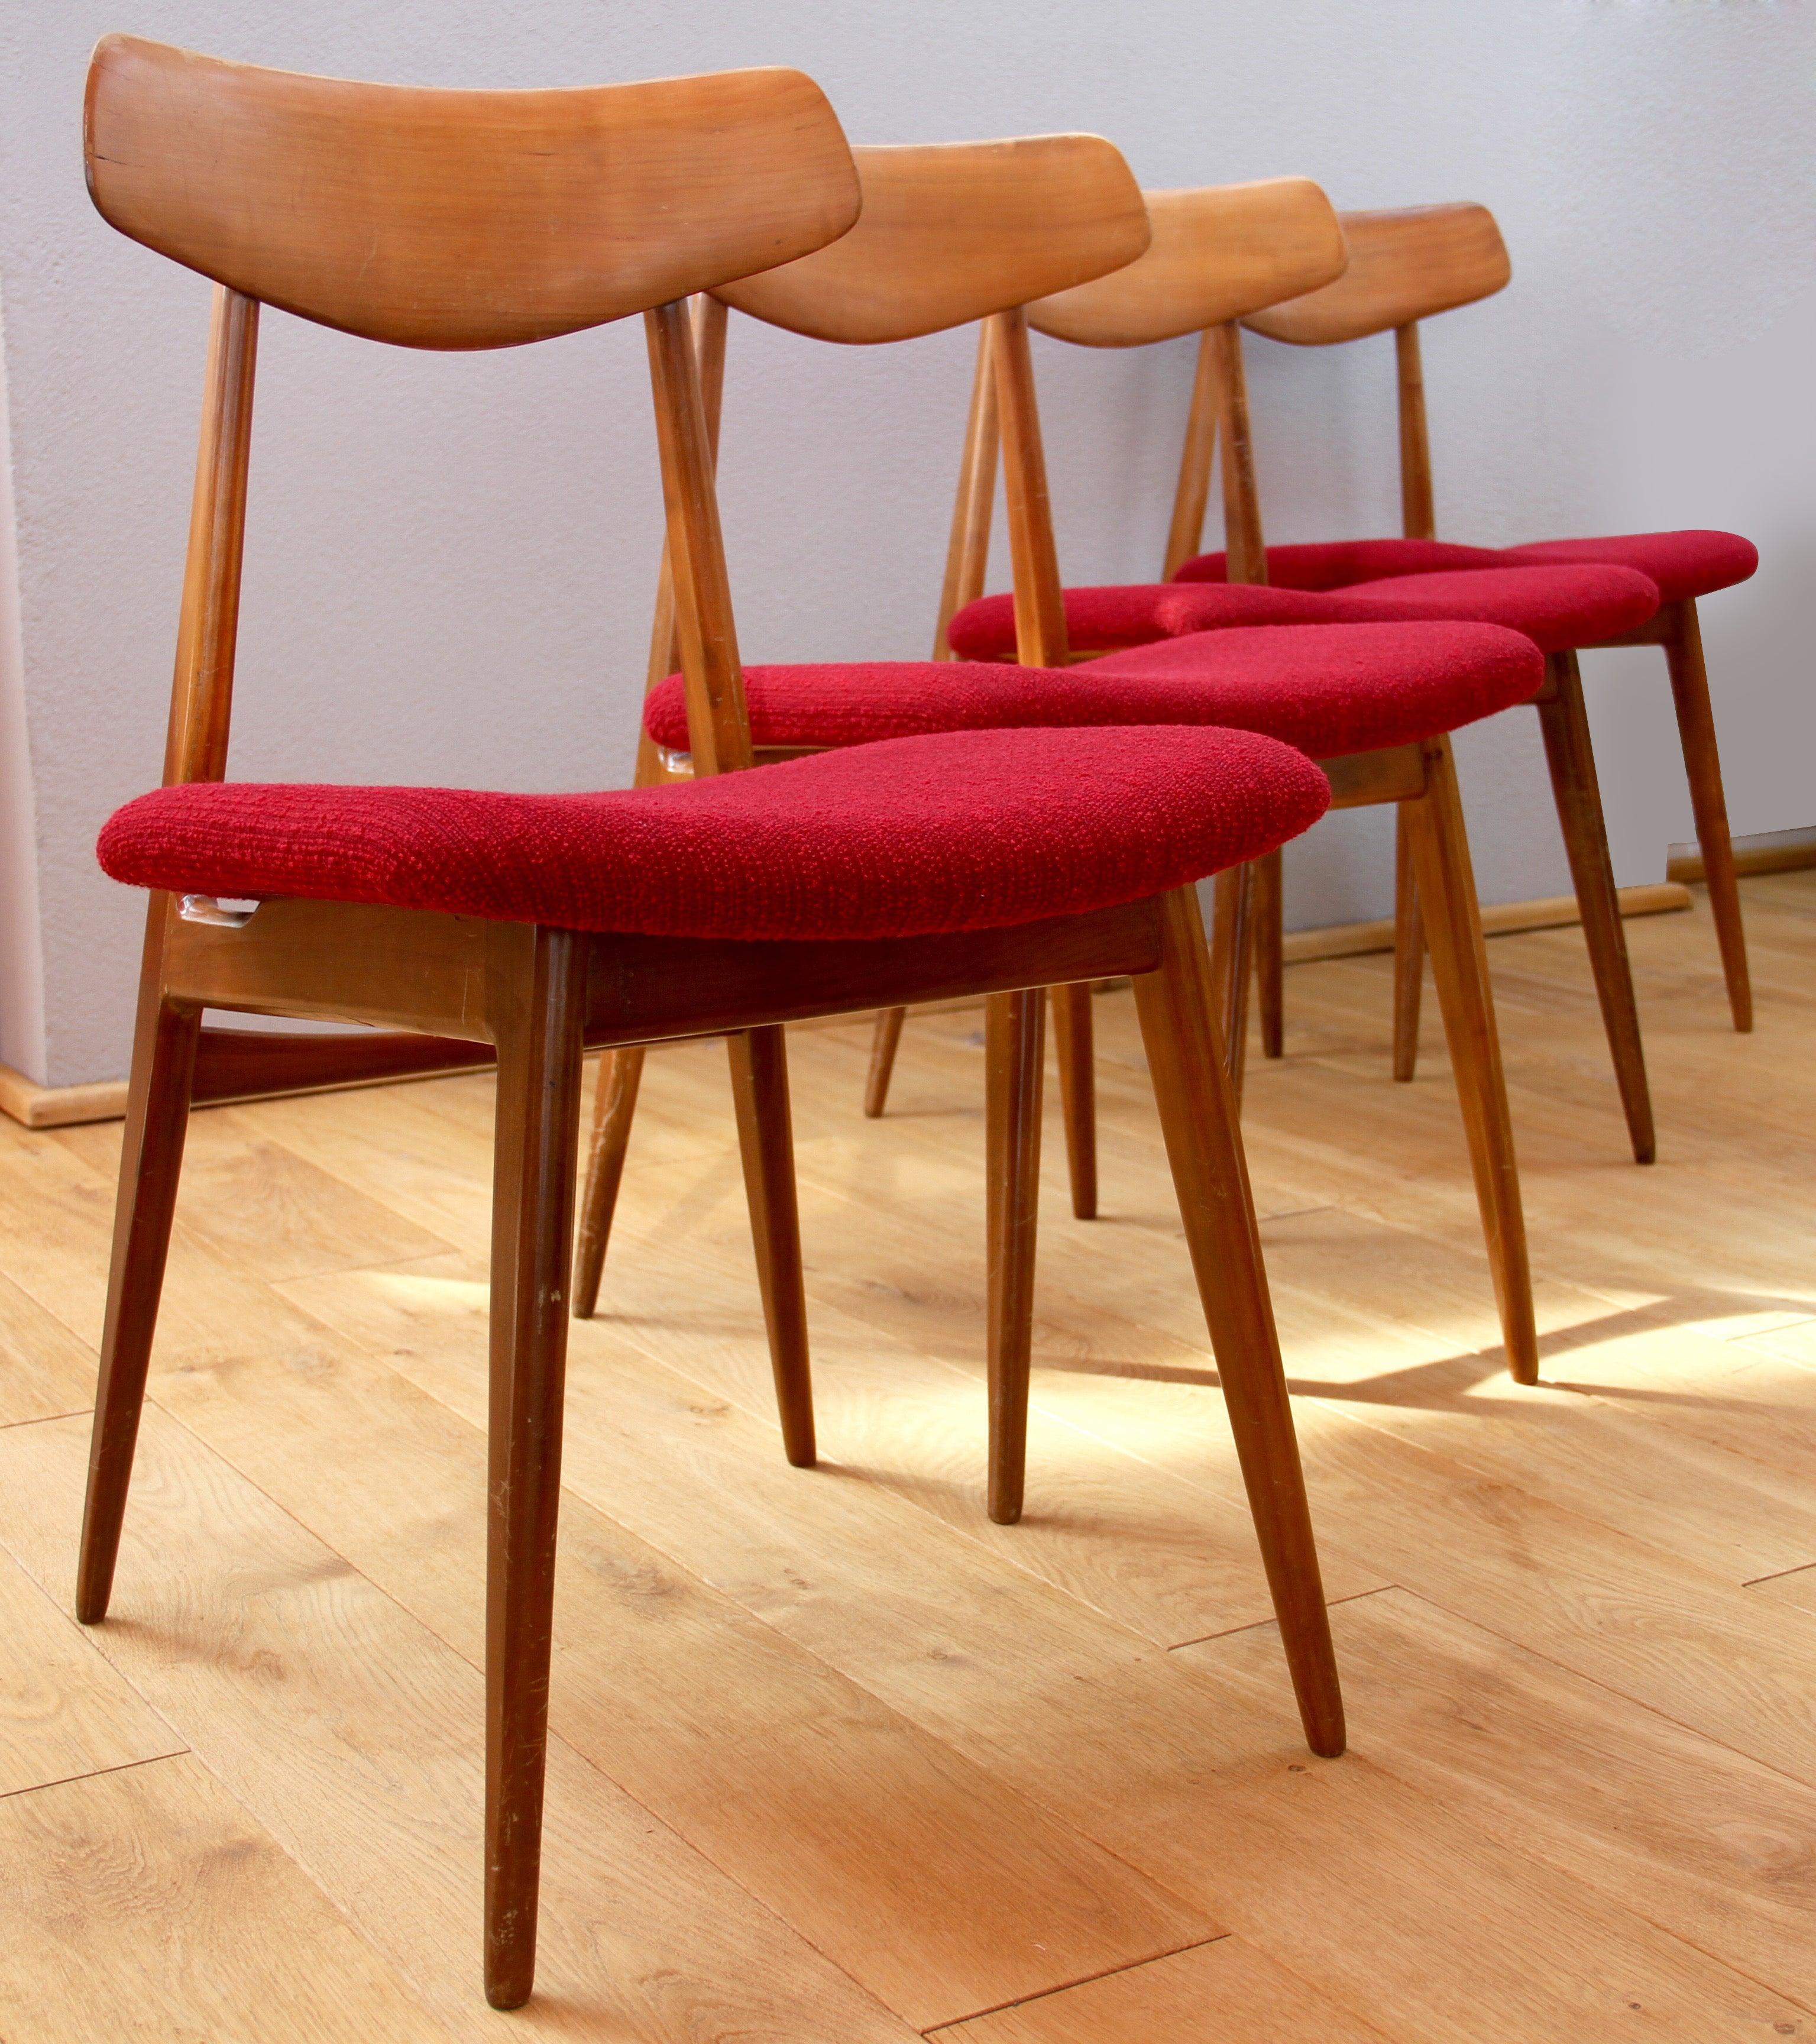 Hans Wegner style midcentury German made set of four dining chairs made by Habeo Möbel, circa 1954 complete with original red fabric.

These Habeo chairs also have a similar angles like the Wegner chairs to both the seat and backrest, making them